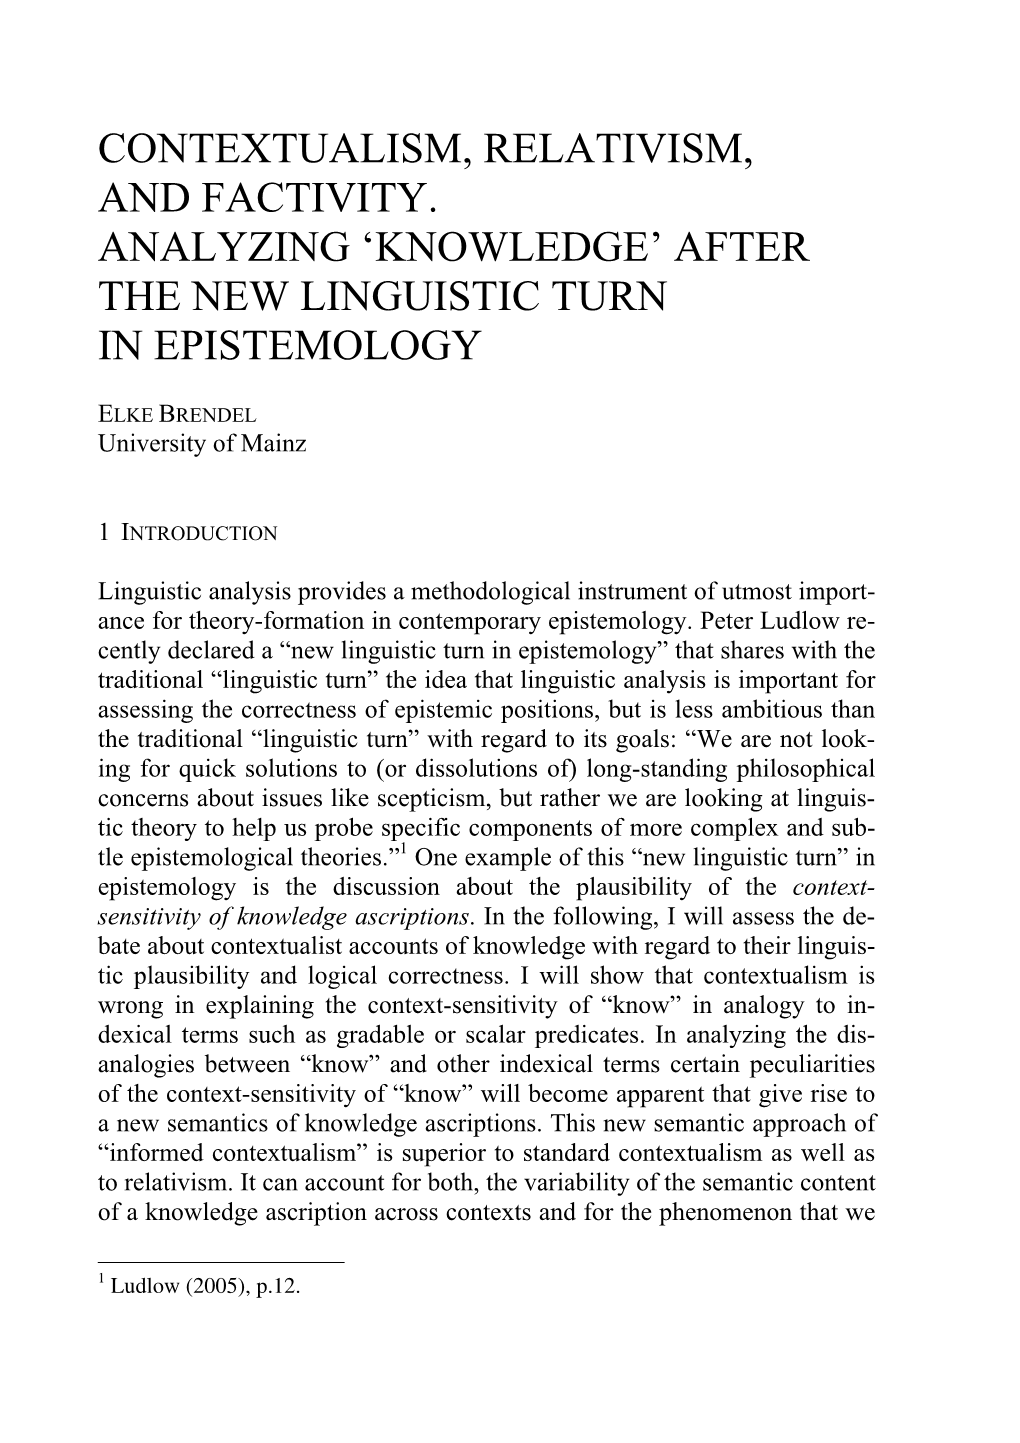 Contextualism, Relativism, and Factivity. Analyzing ‘Knowledge’ After the New Linguistic Turn in Epistemology